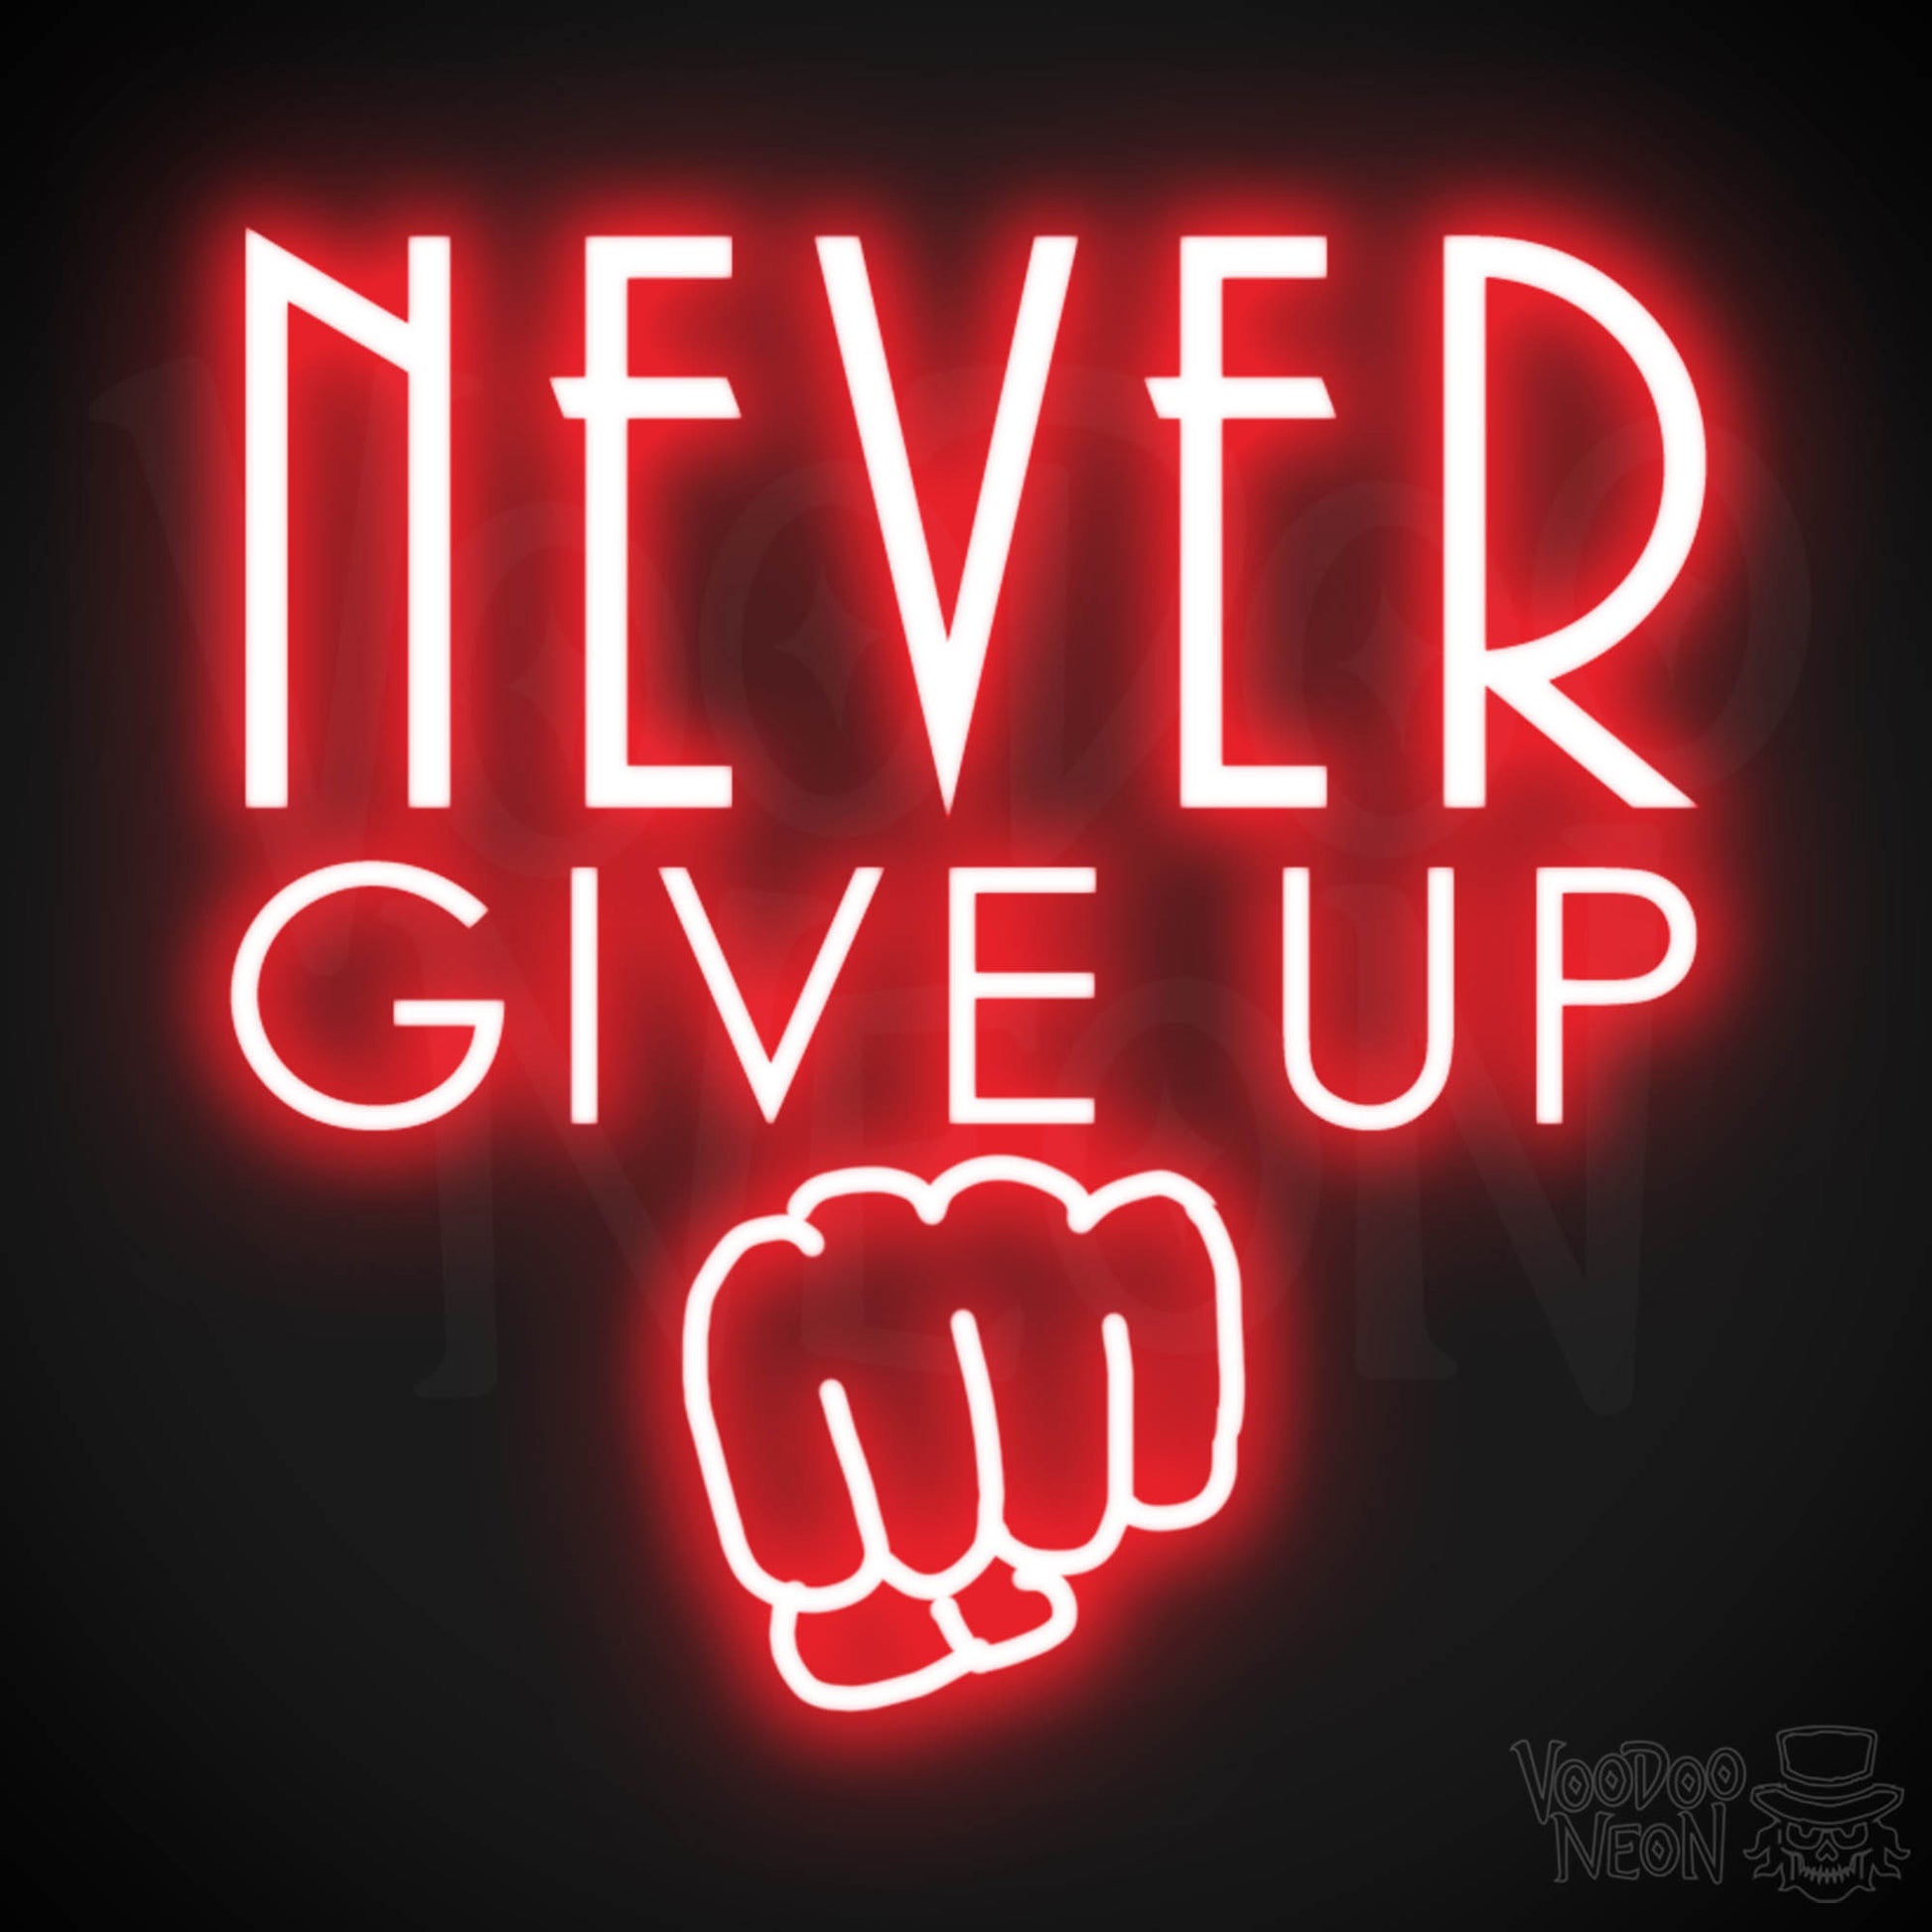 Never Give Up Neon Sign - Neon Never Give Up Sign - LED Sign - Color Red